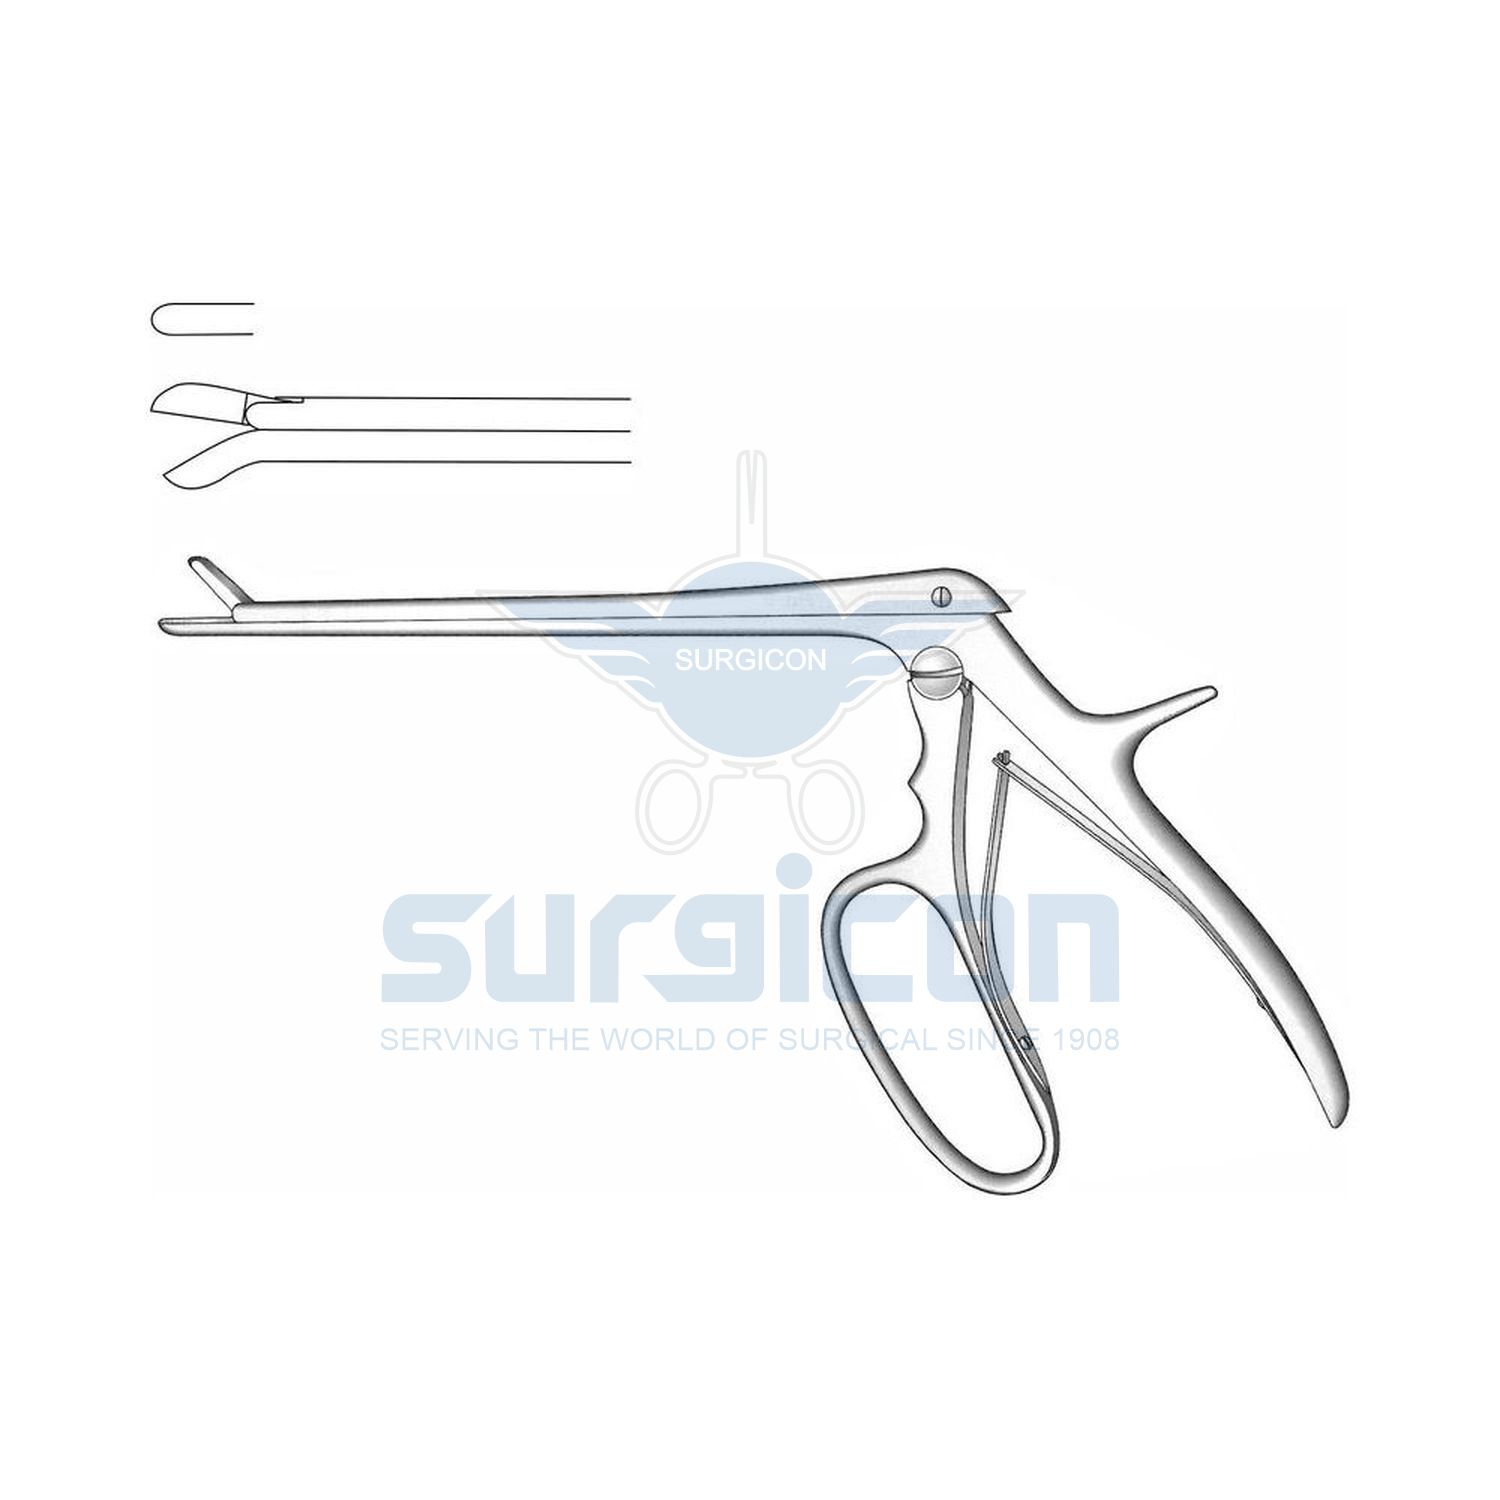 Ferris-Smith-Chusing-Punches-and-Rongeur-Forcep-J-32-1089